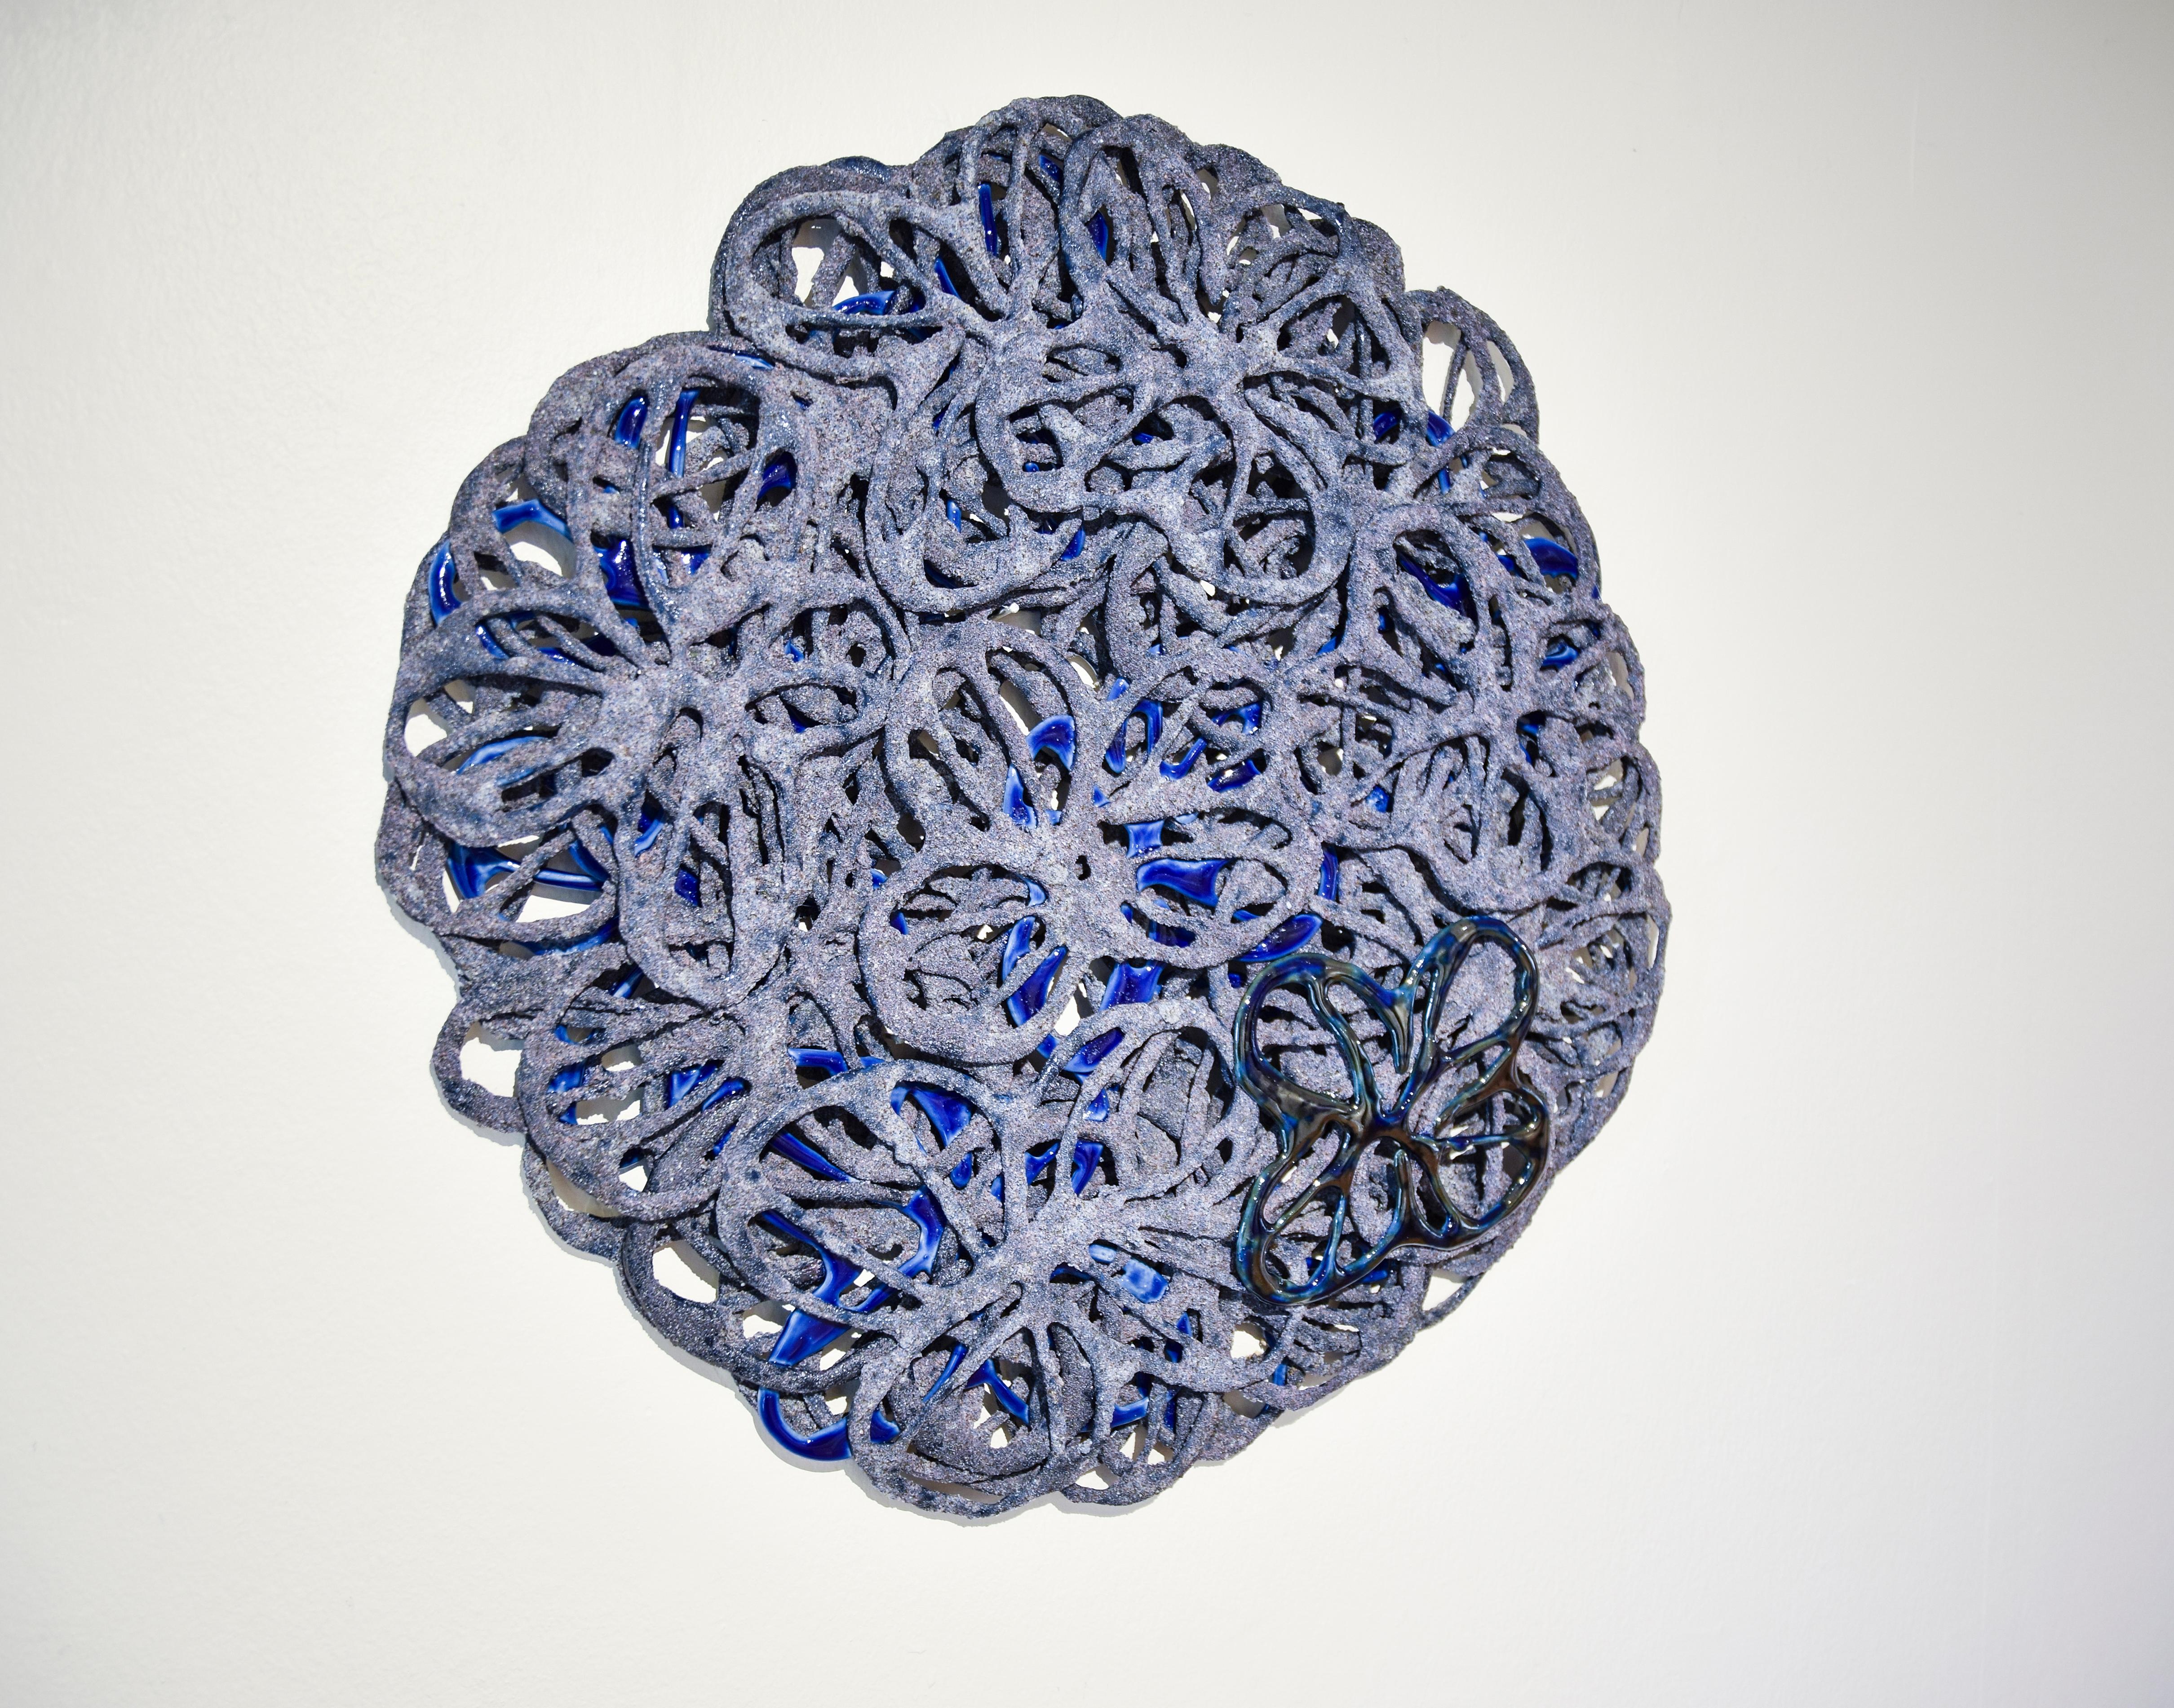 Blue flowers by Lea Nordstrøm
Dimensions: 40 x 4 x 40 cm
Materials: glazed porcelain


“One of the greatest things about designing and creating is when someone wants to take my work home to live with them”, Lea Nordstrøm Lea earned her masters